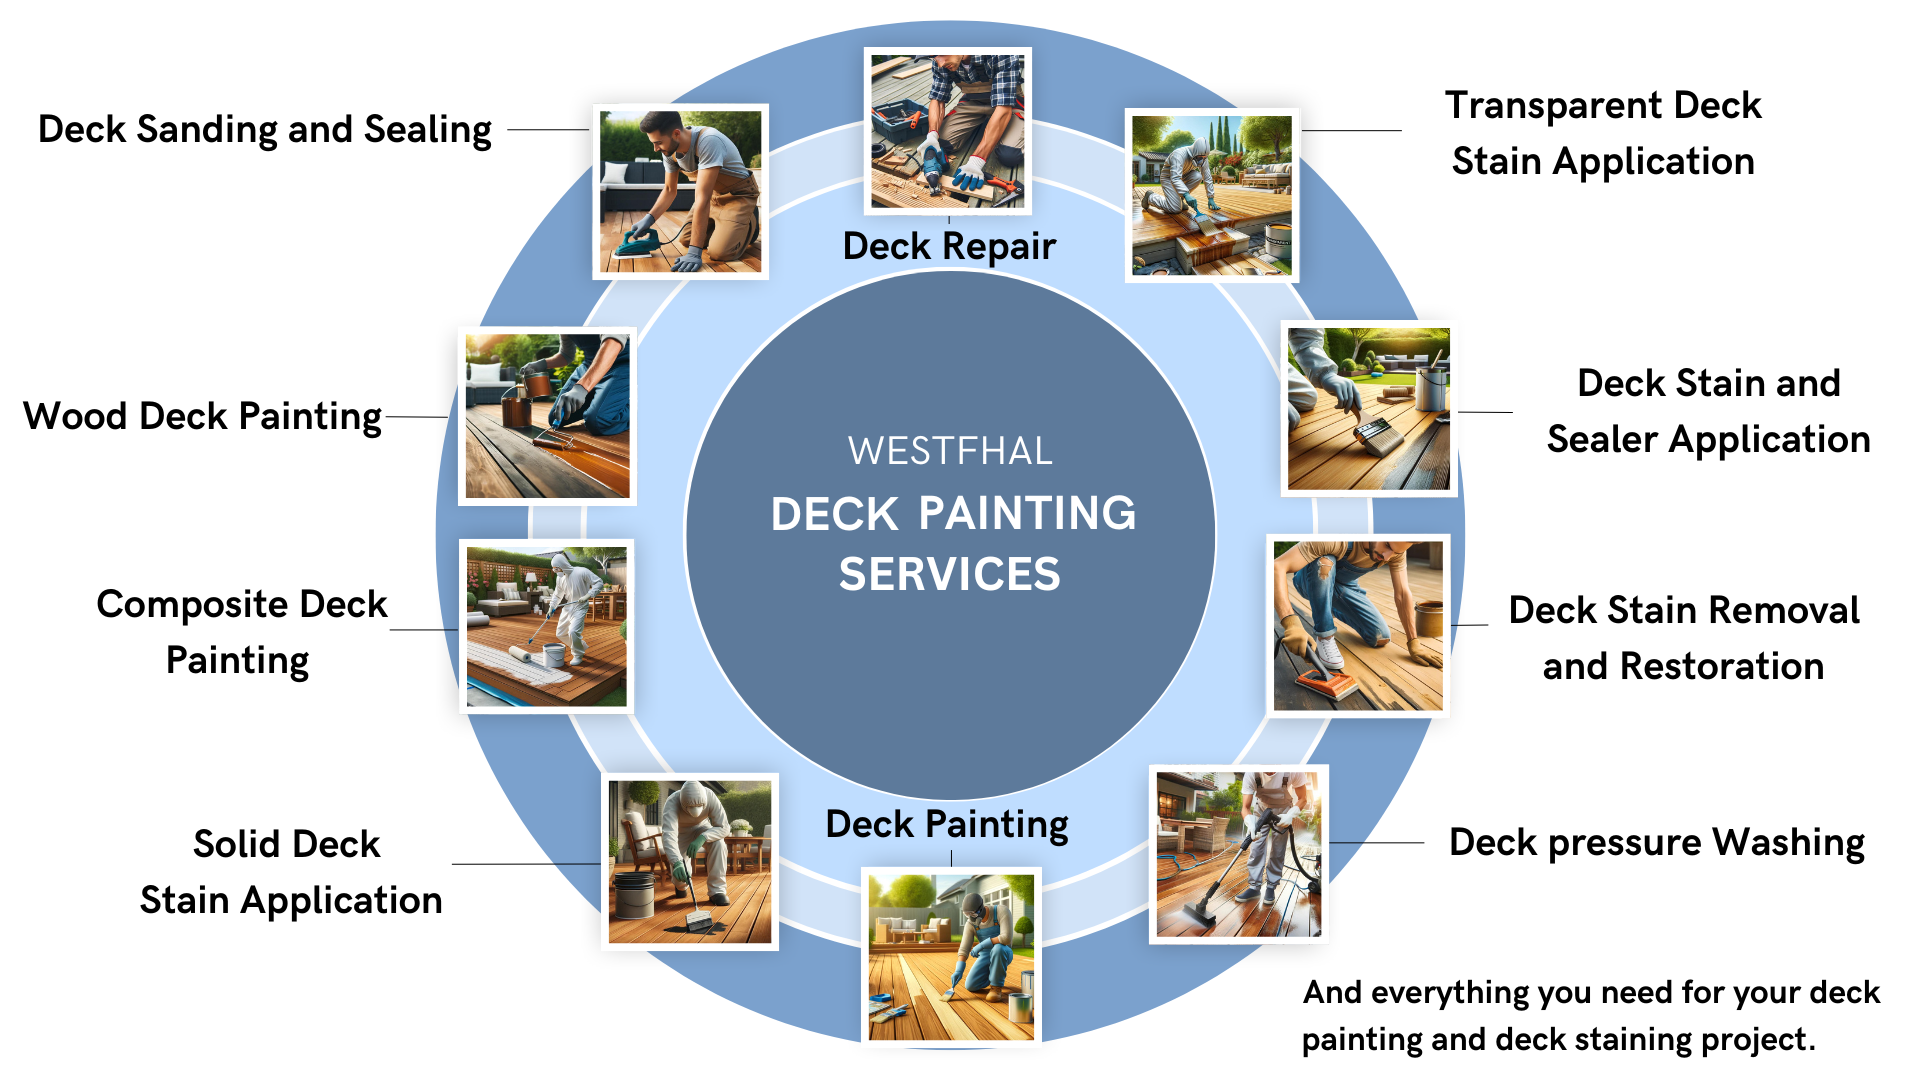 Infographic depicting the step-by-step process of deck painting, including preparation, priming, painting, and sealing.